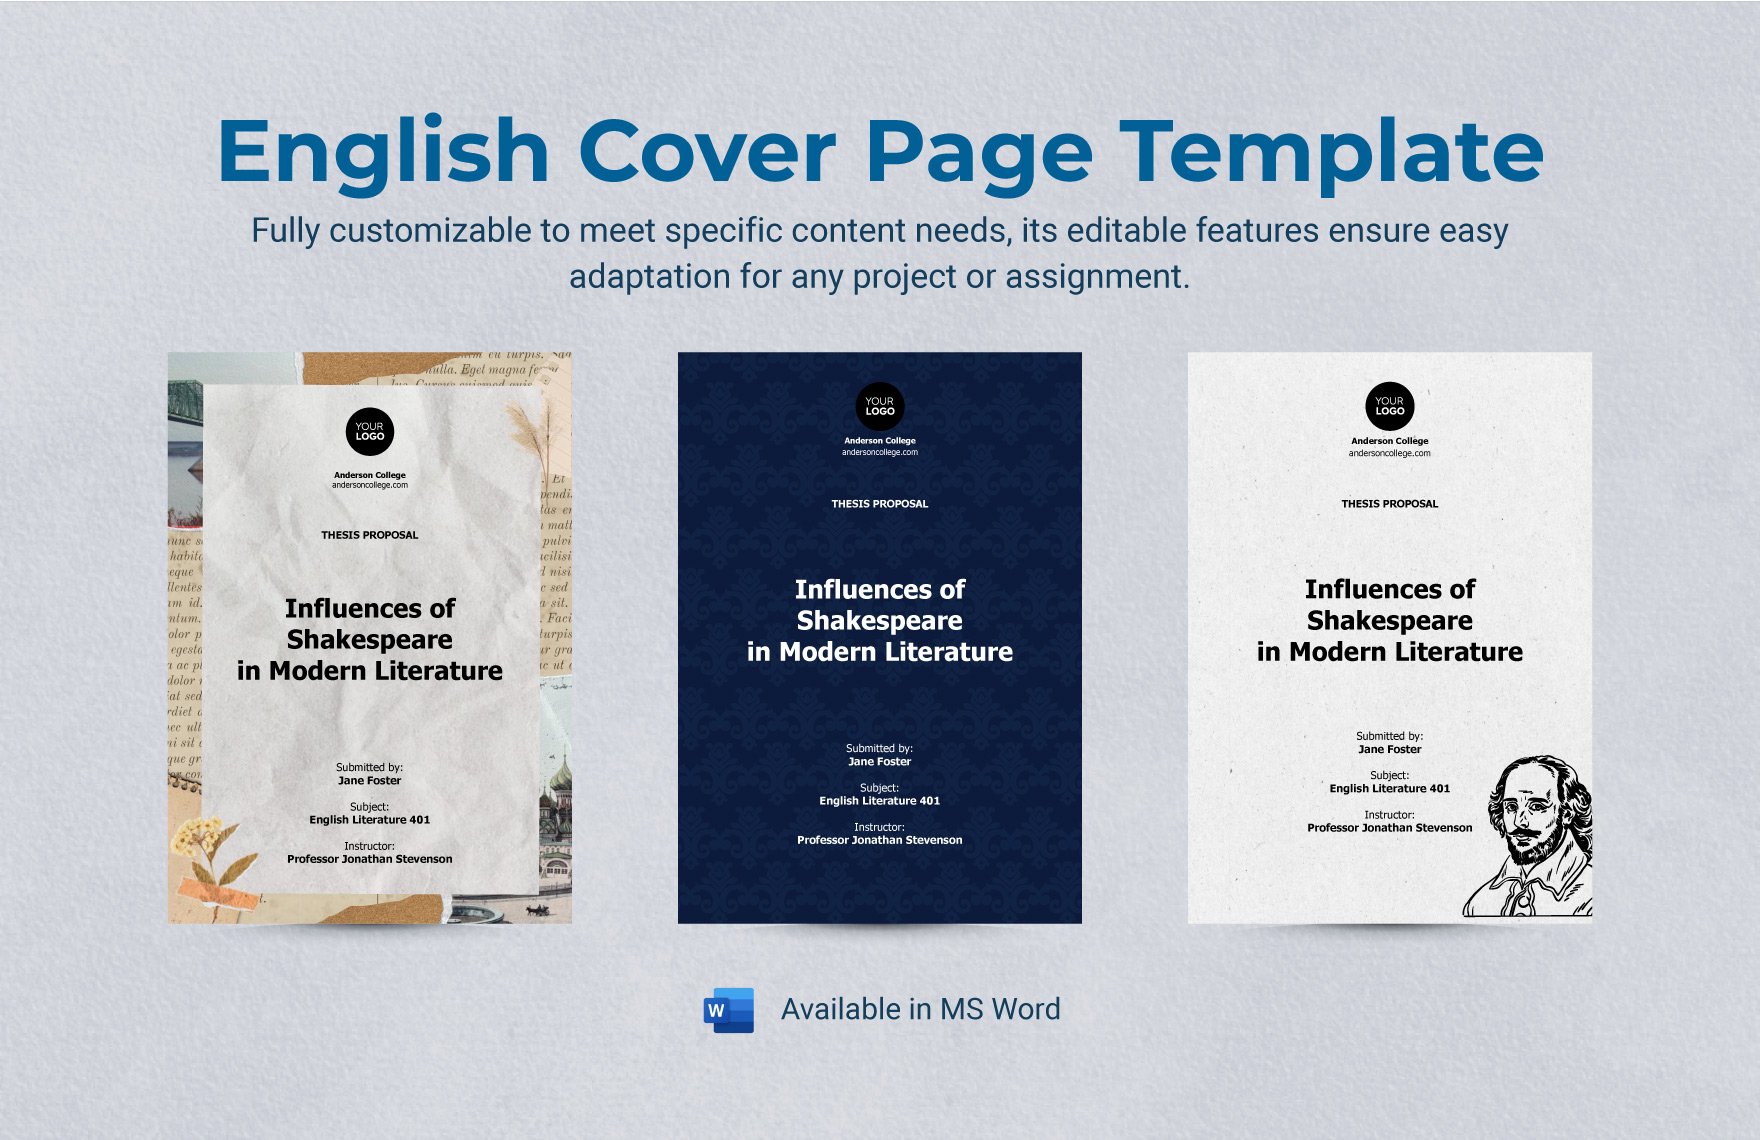 English Cover Page Template